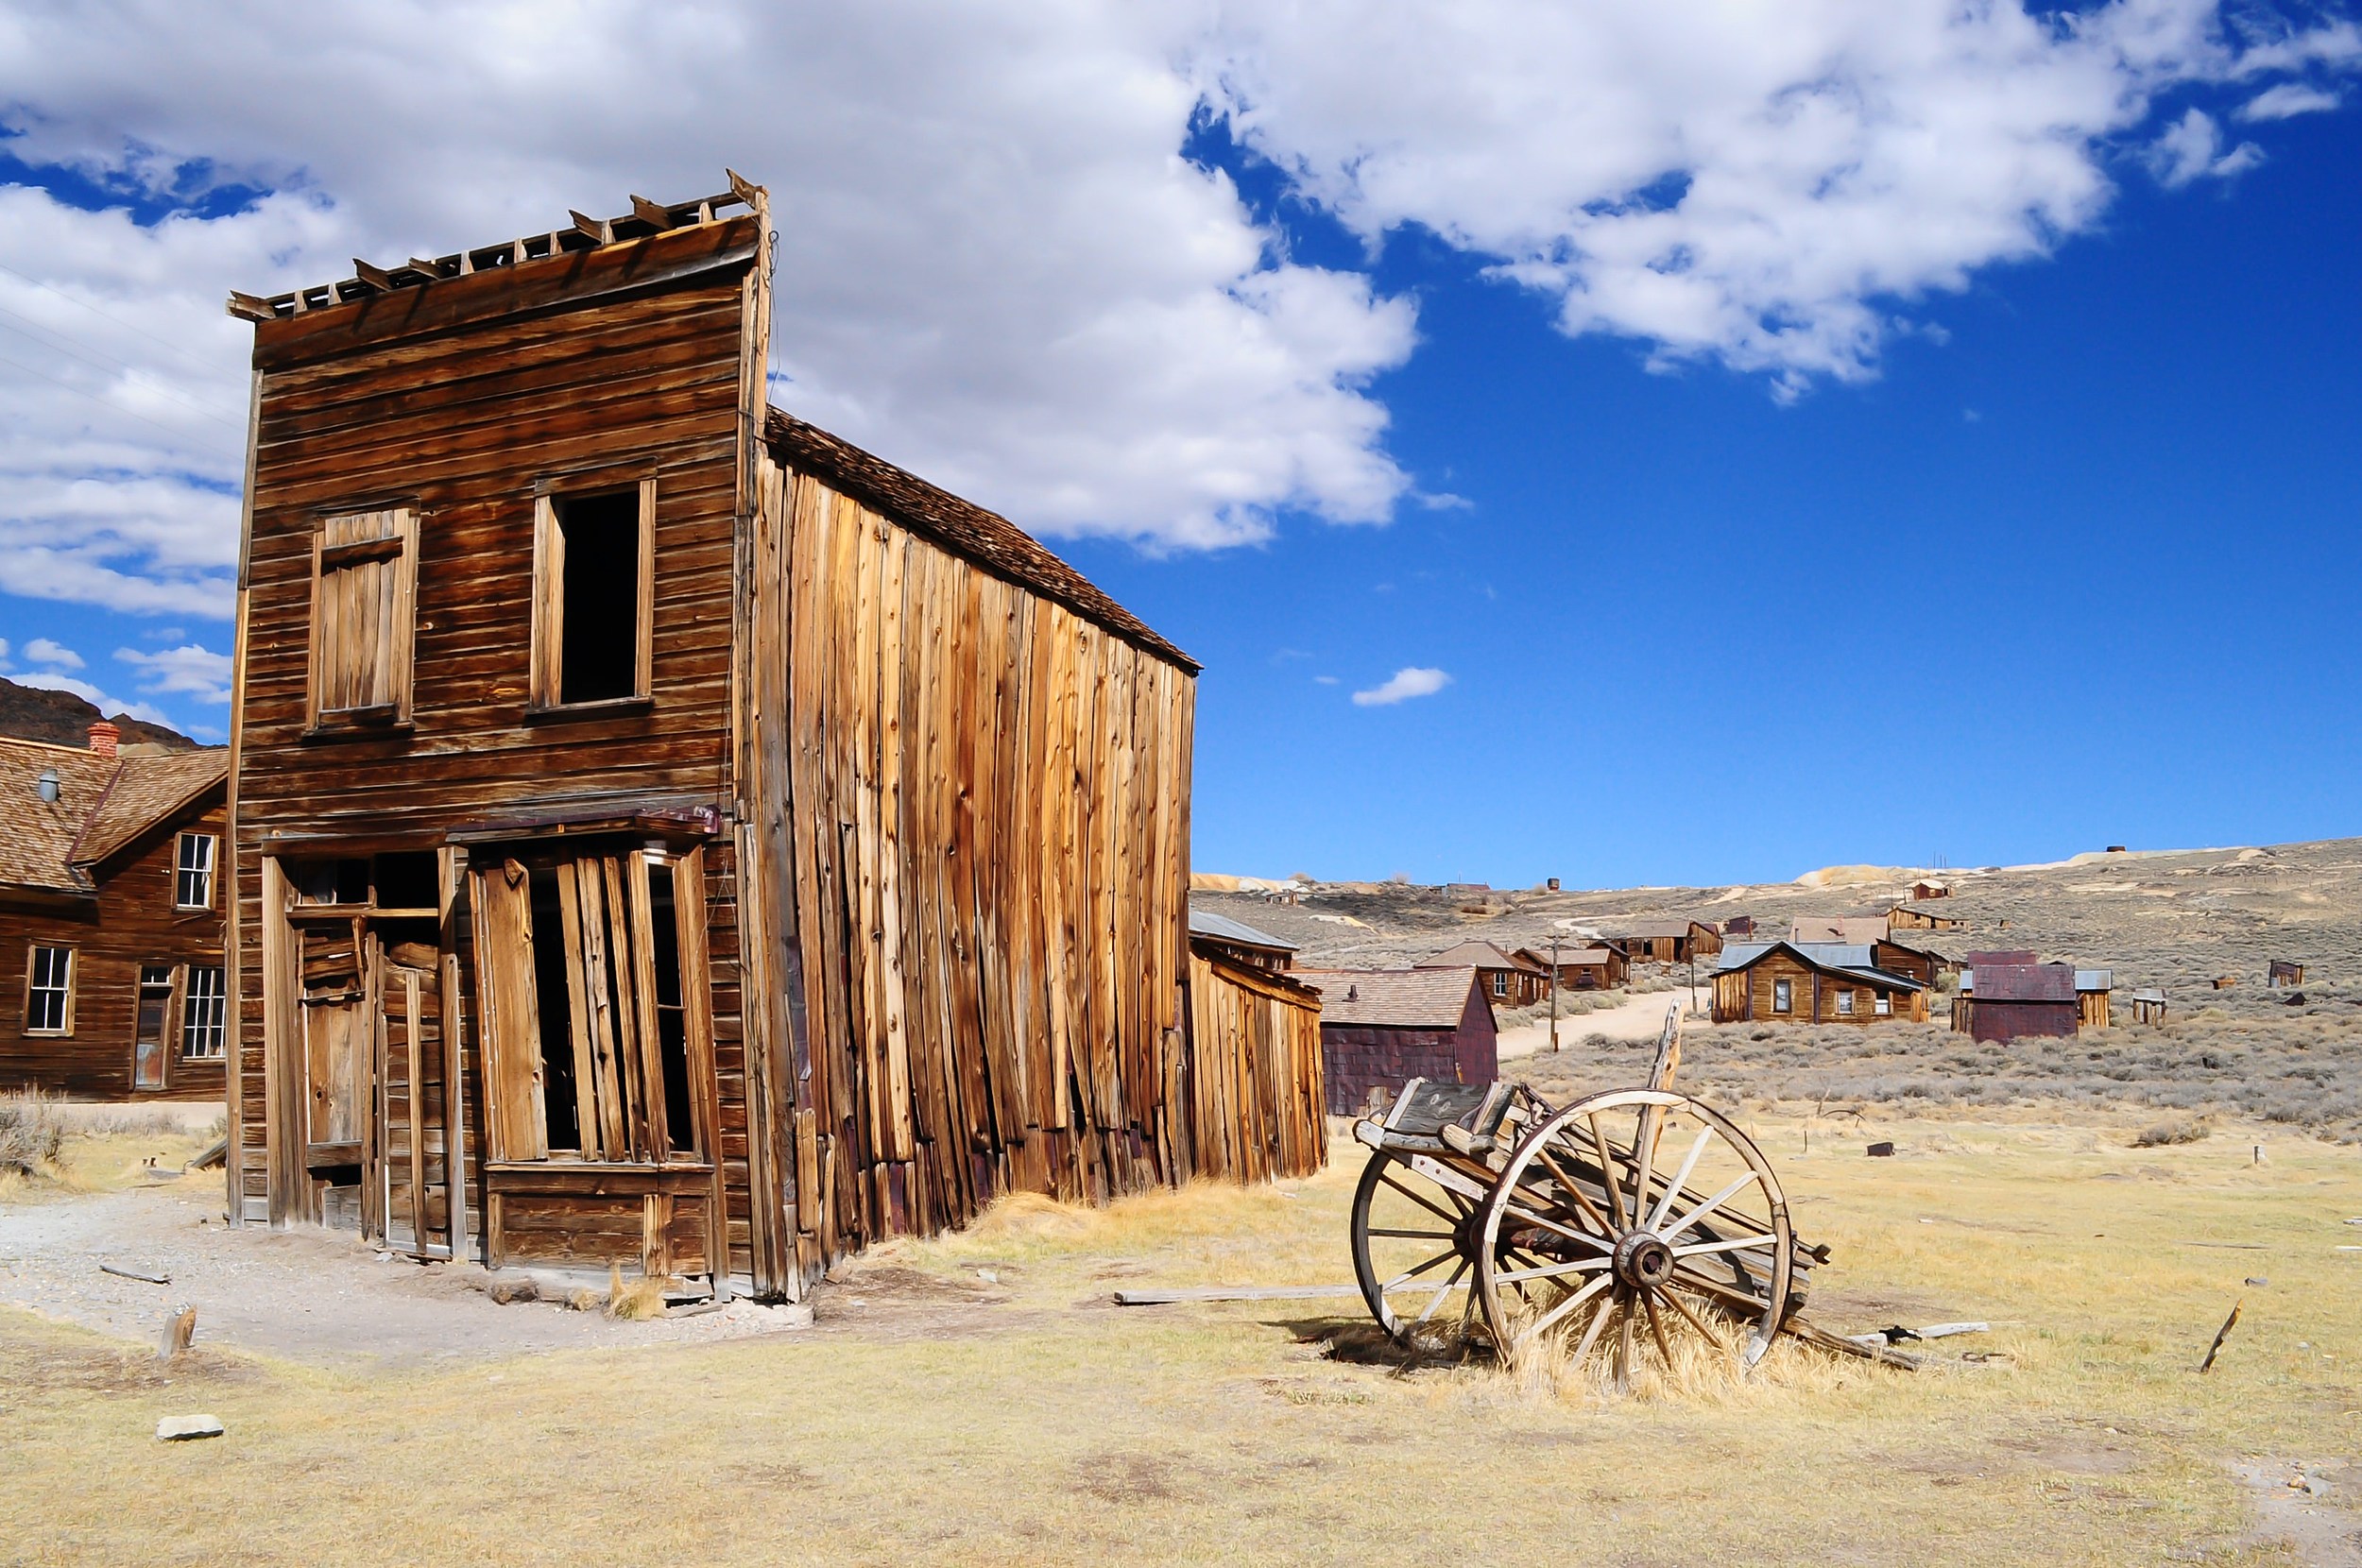 Terrifying Ghost Towns in WA That Might Freak You